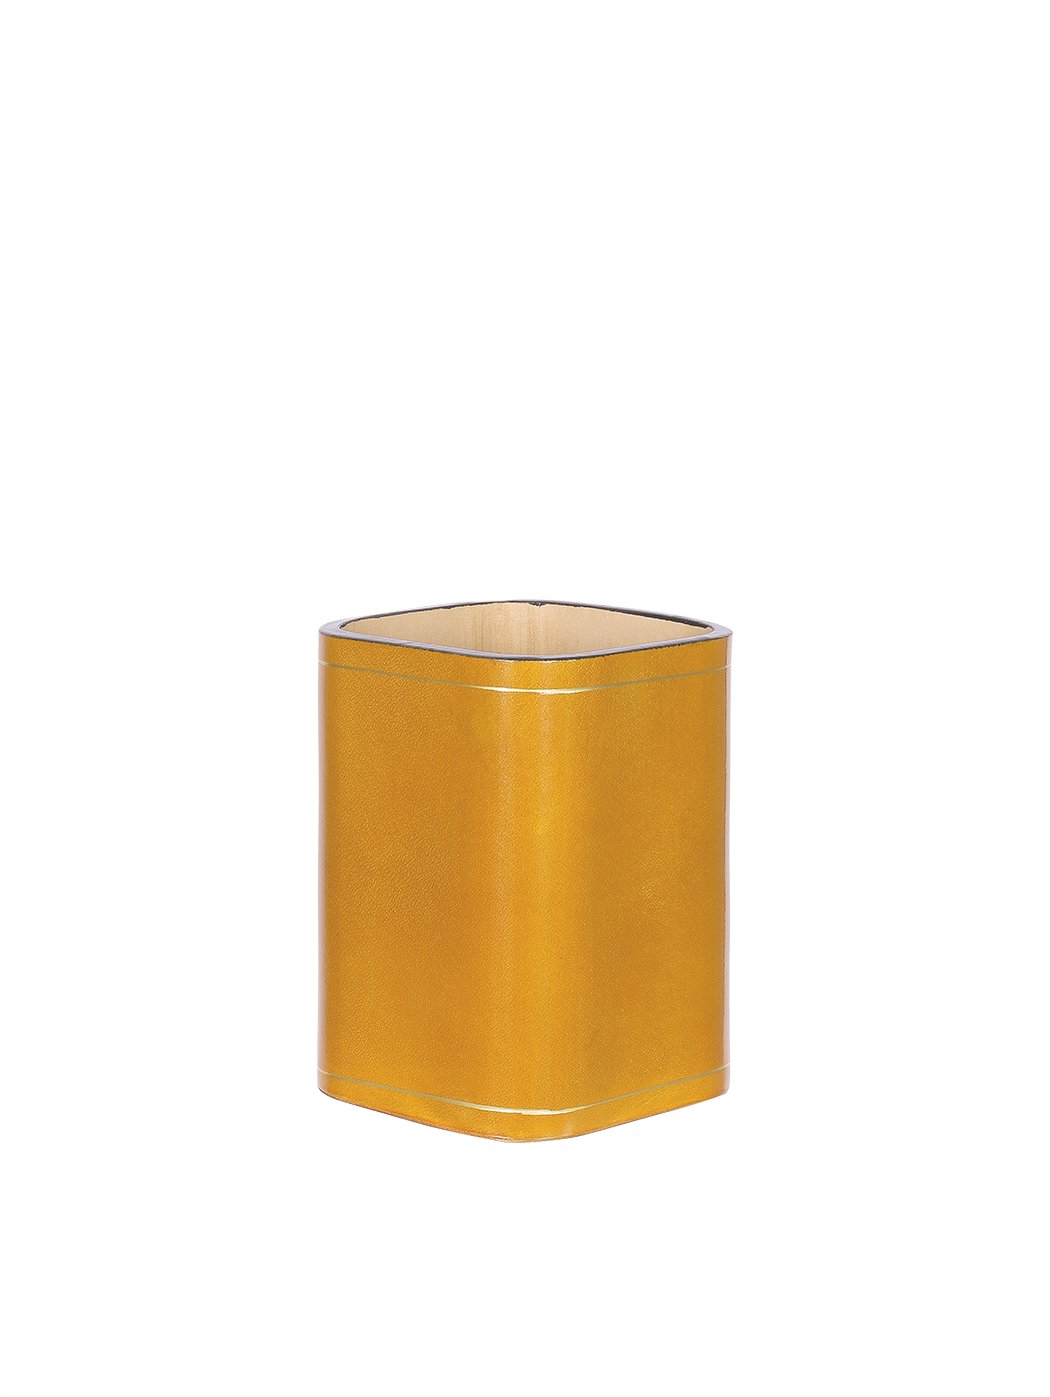 Desk Pen Holder Cup Leather Yellow